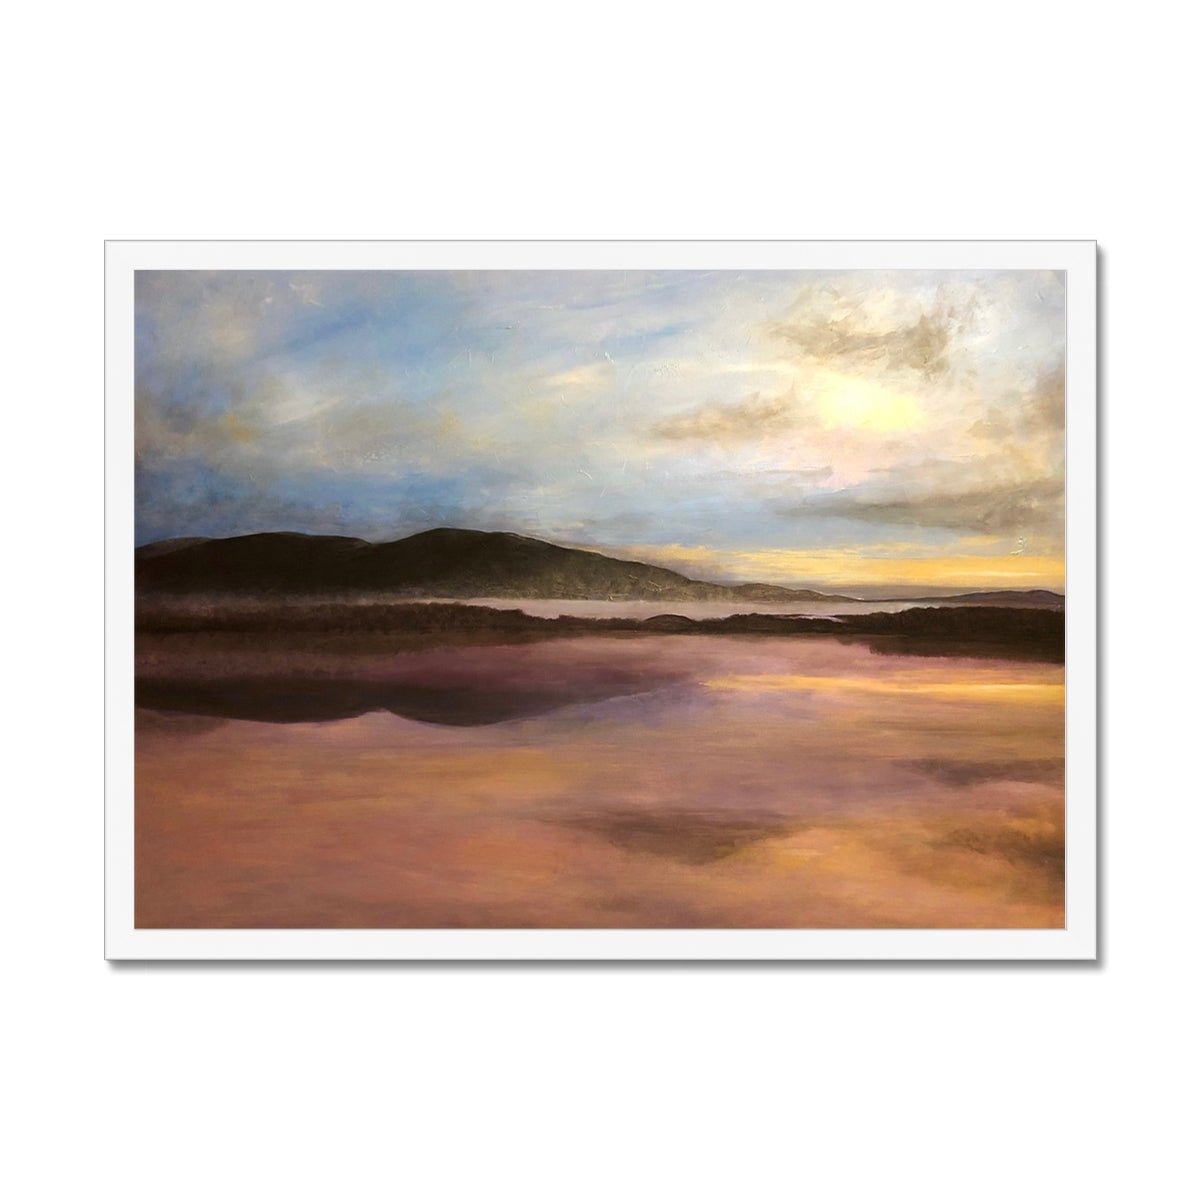 Loch Garten Painting | Framed Prints From Scotland-Framed Prints-Scottish Lochs & Mountains Art Gallery-A2 Landscape-White Frame-Paintings, Prints, Homeware, Art Gifts From Scotland By Scottish Artist Kevin Hunter